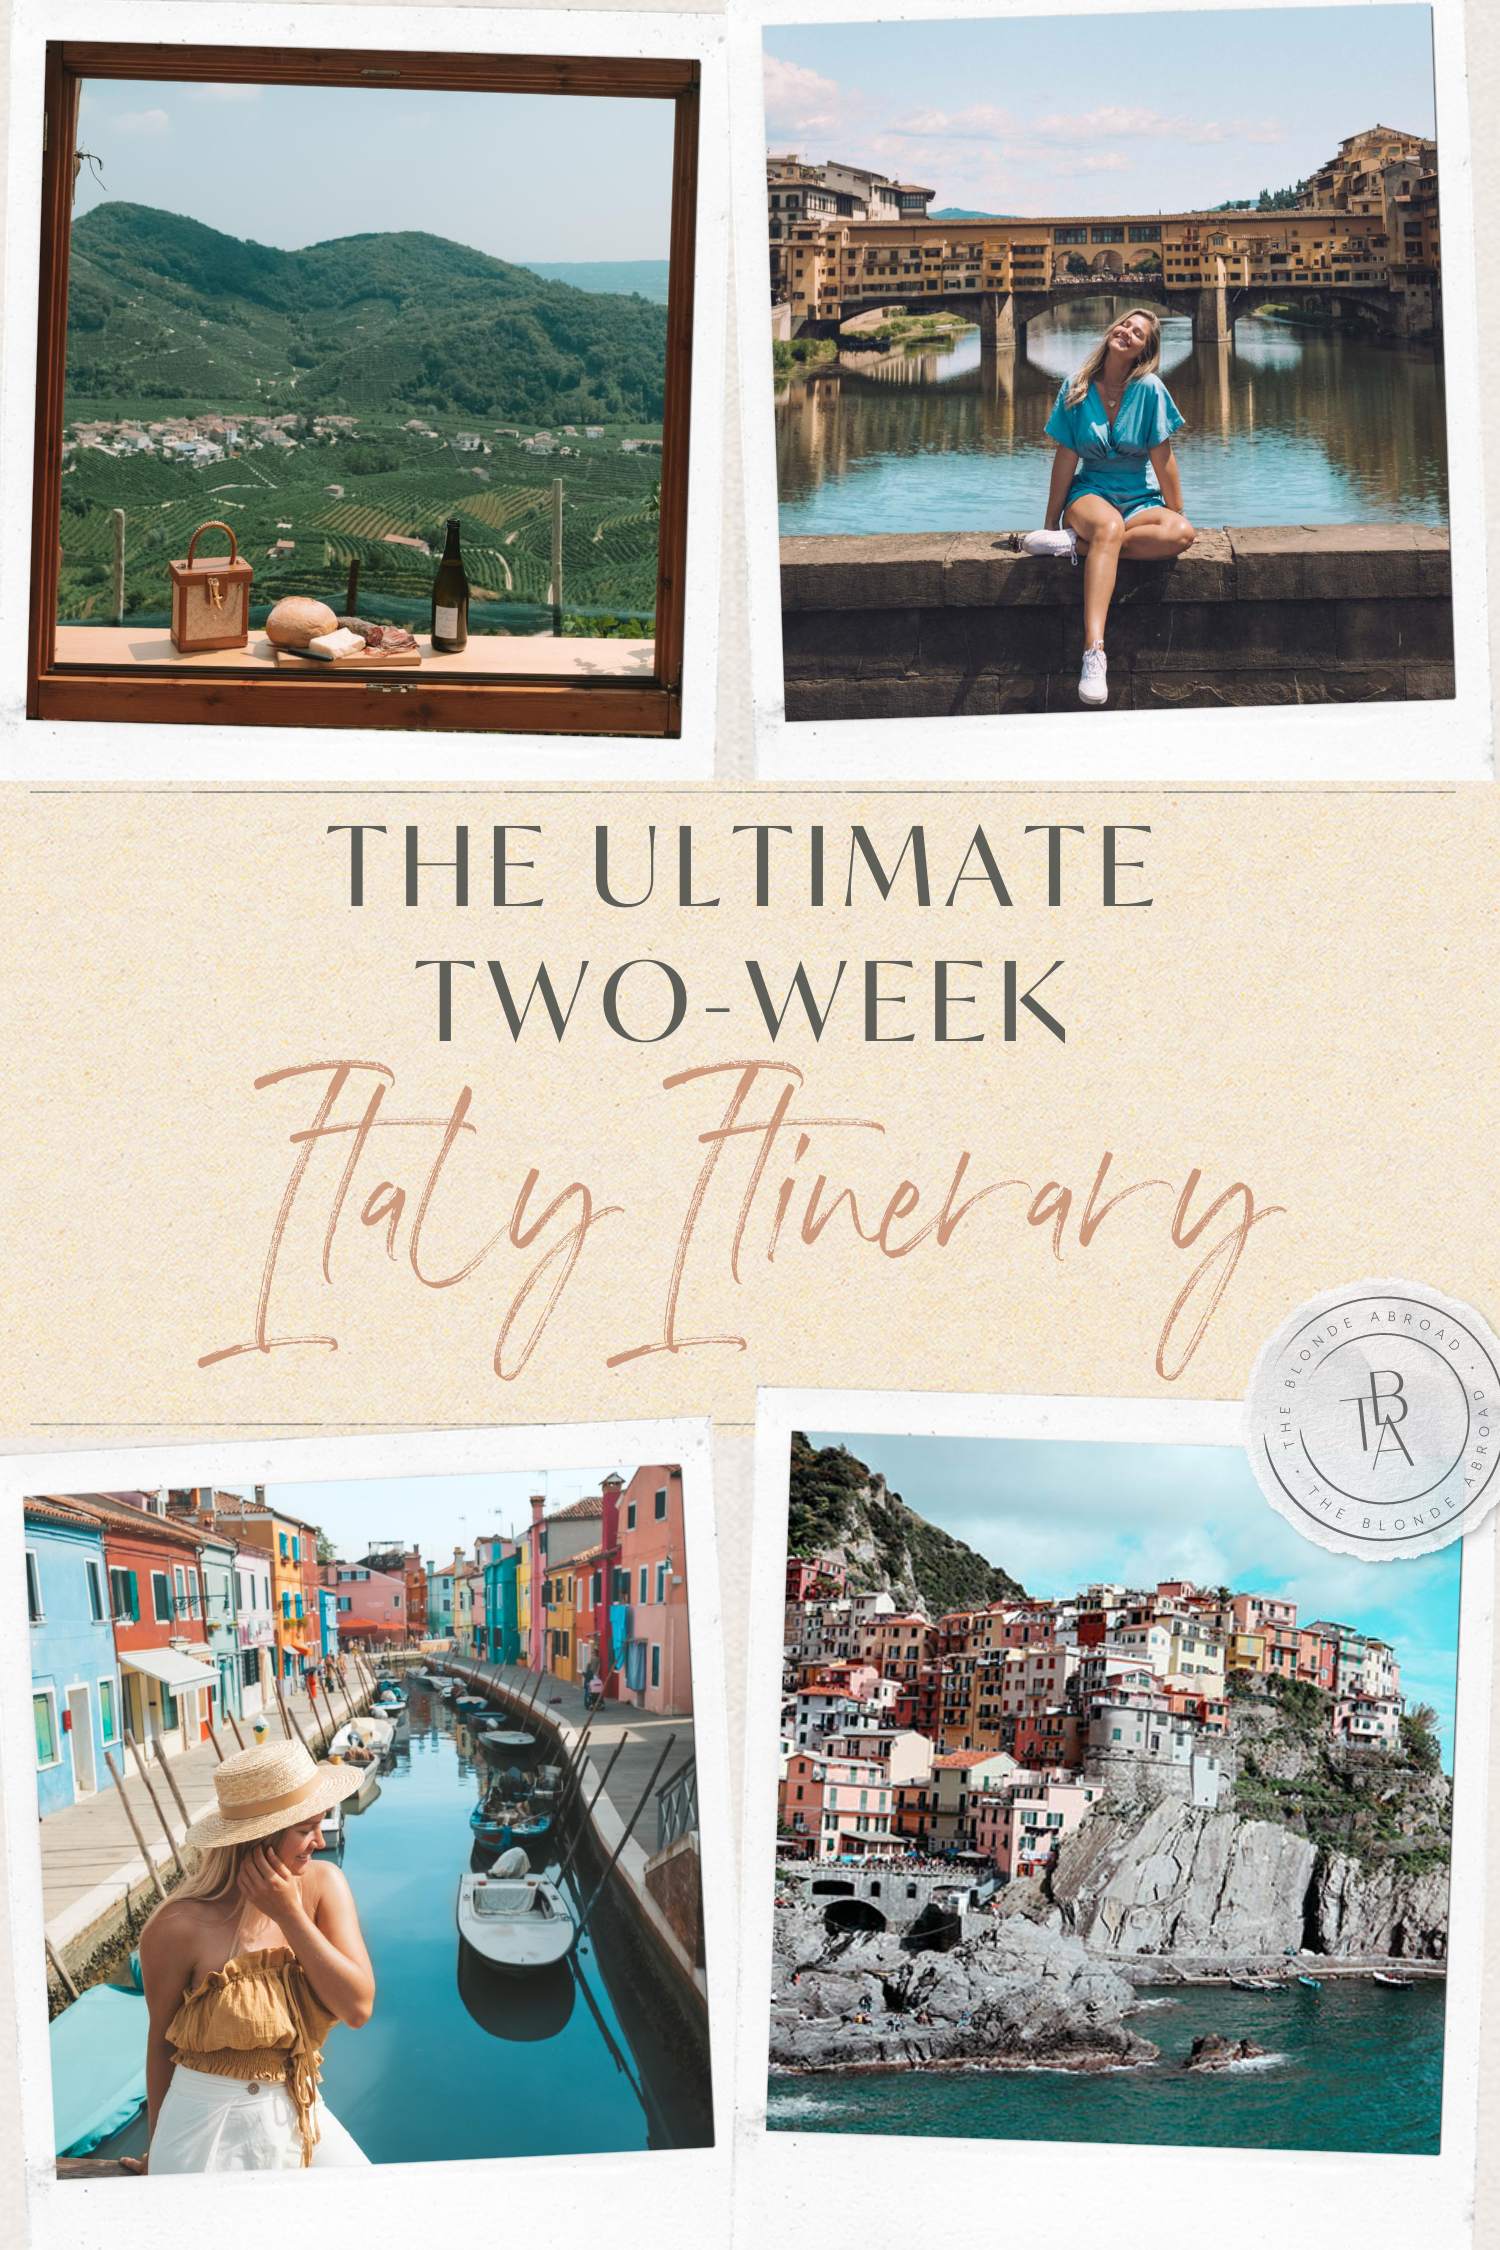 The Ultimate two-week Italy itinerary